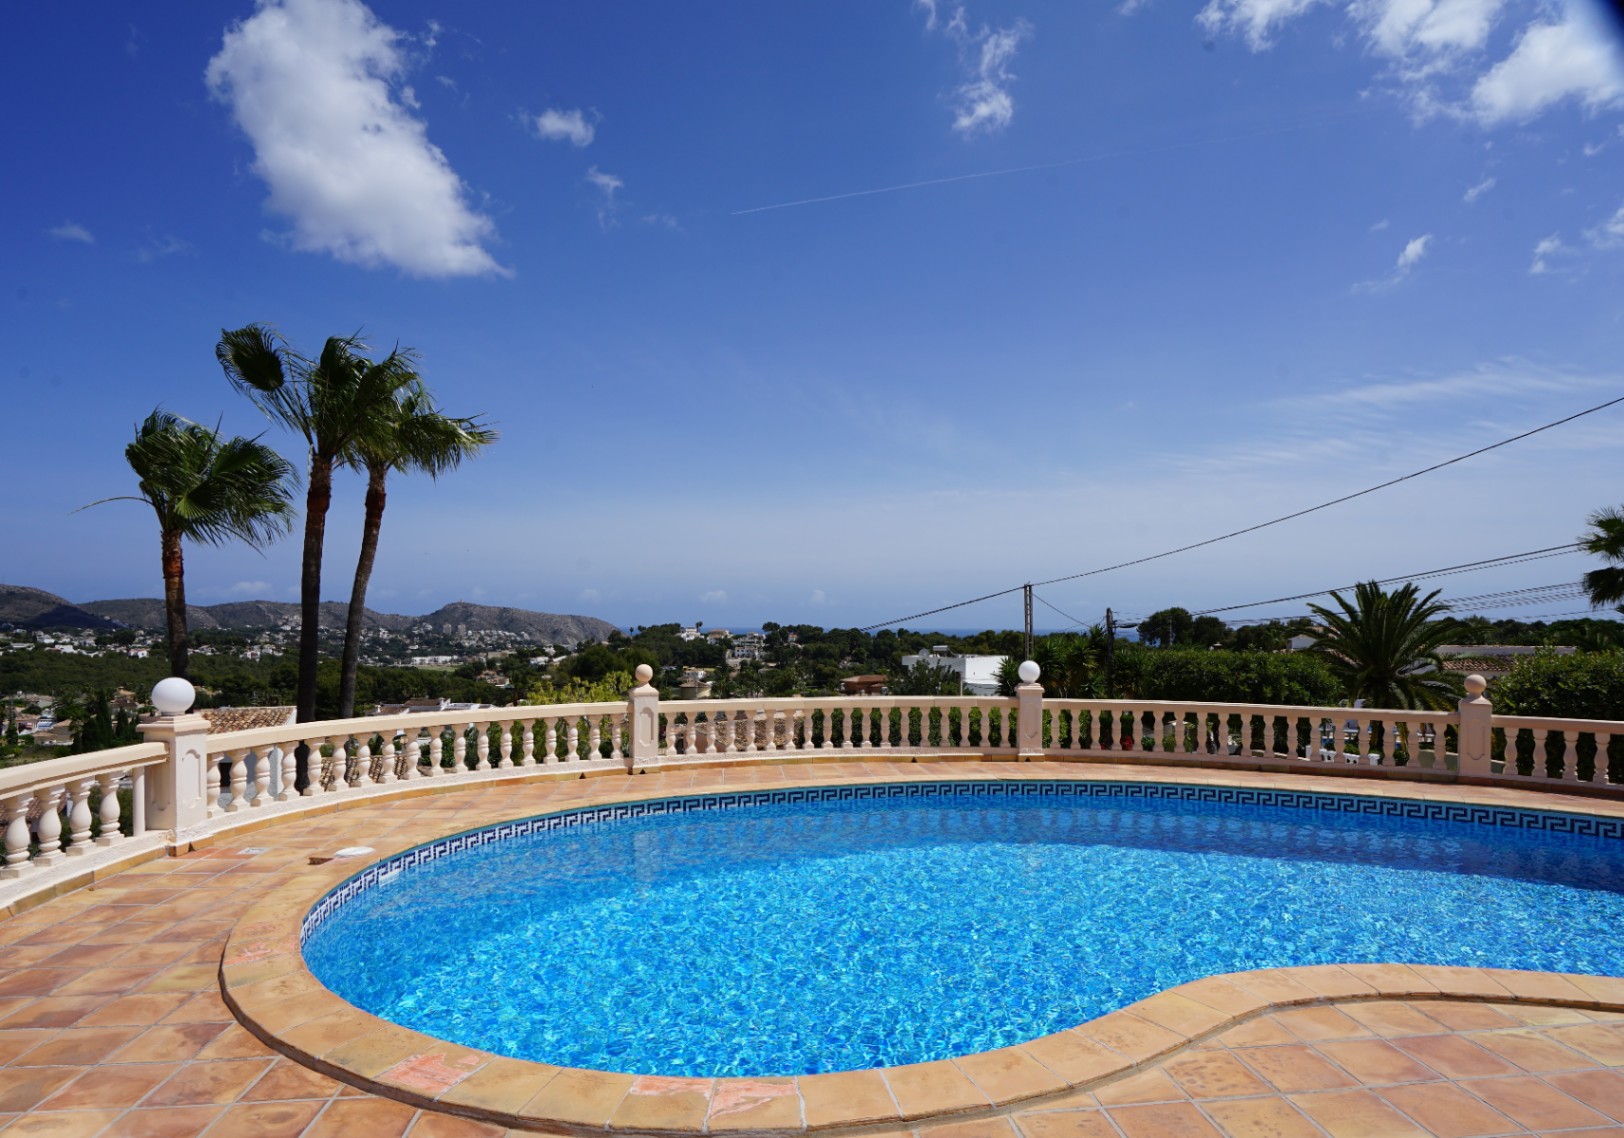 Photogallery - 3 - Exceptional homes in the Costa Blanca. Unparalleled Service. Exceptional properties in the Costa Blanca